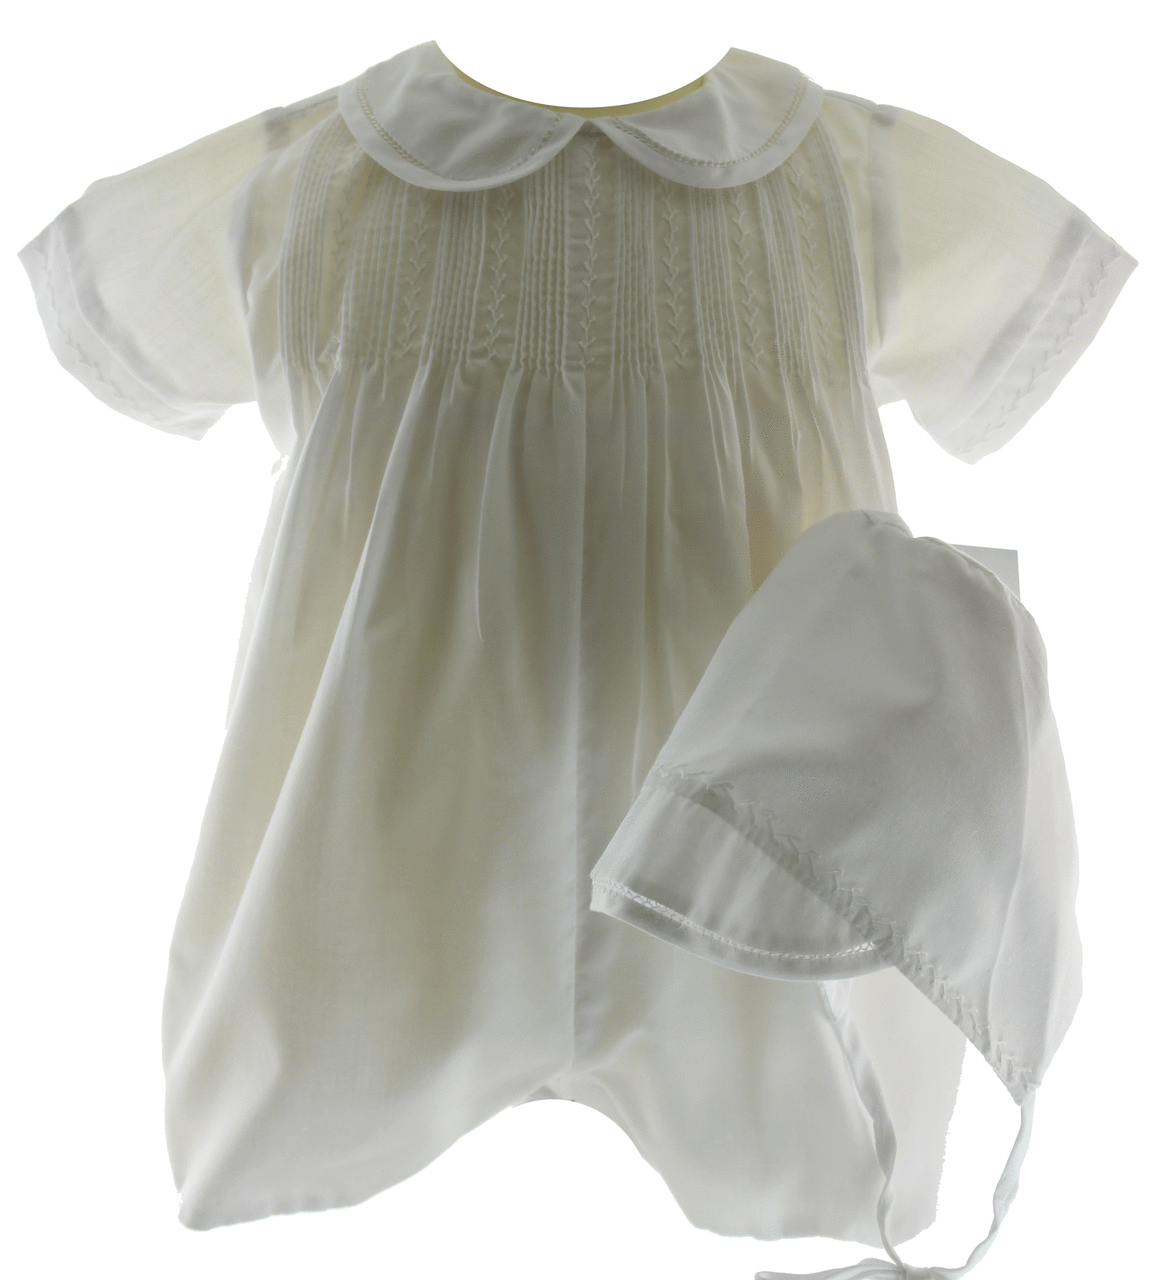 Infant Boys White Christening Romper Outfit with Pintucks